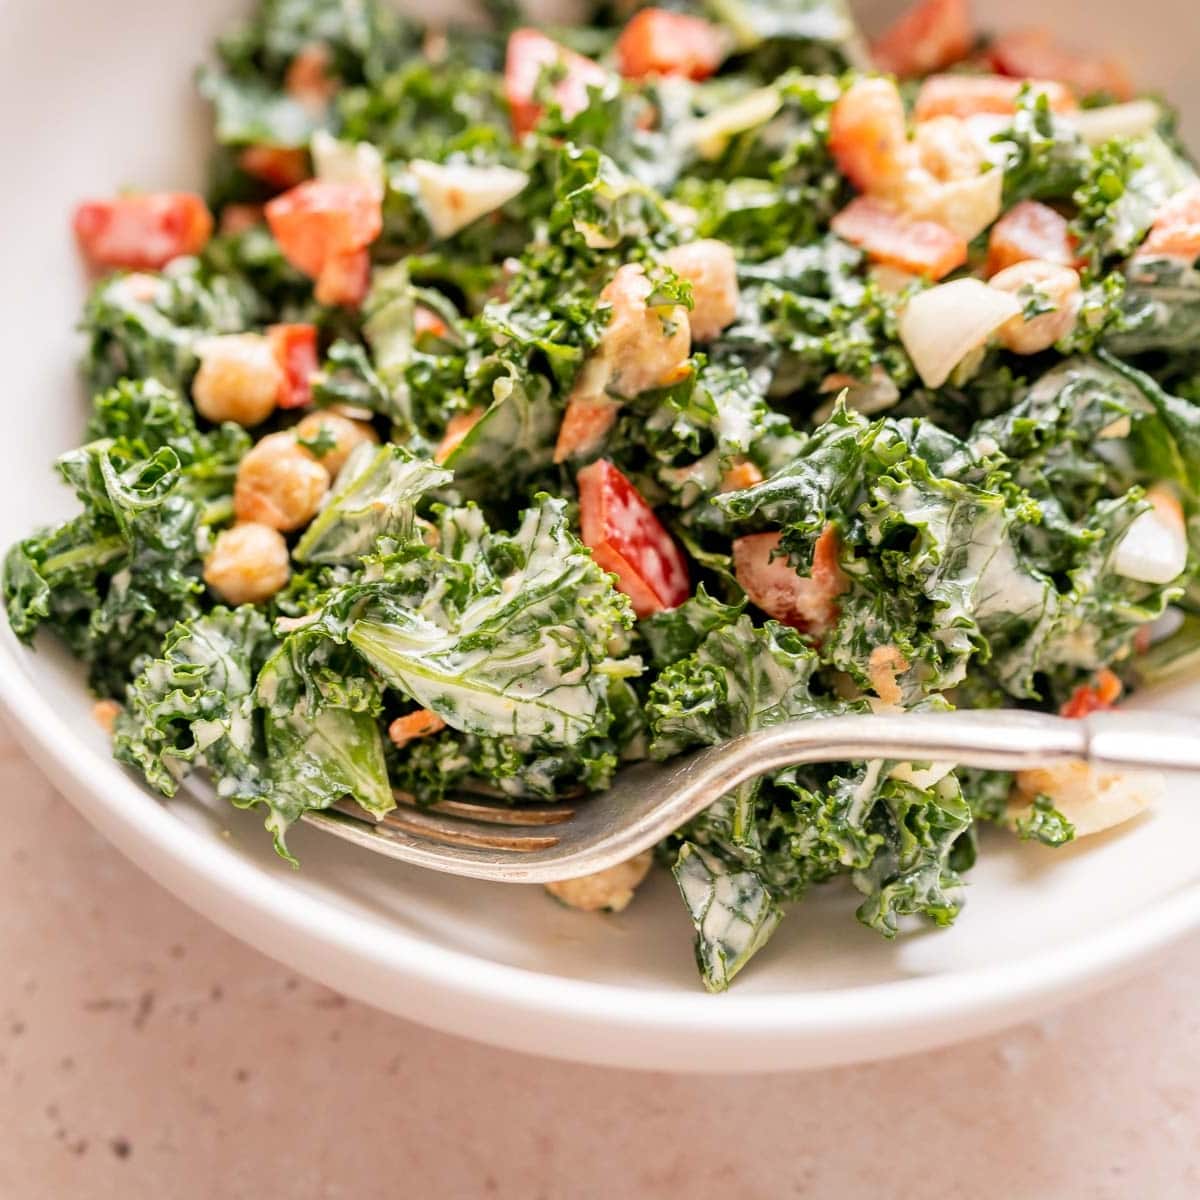 A close shot of a silver fork in a white bowl filled with kale salad.